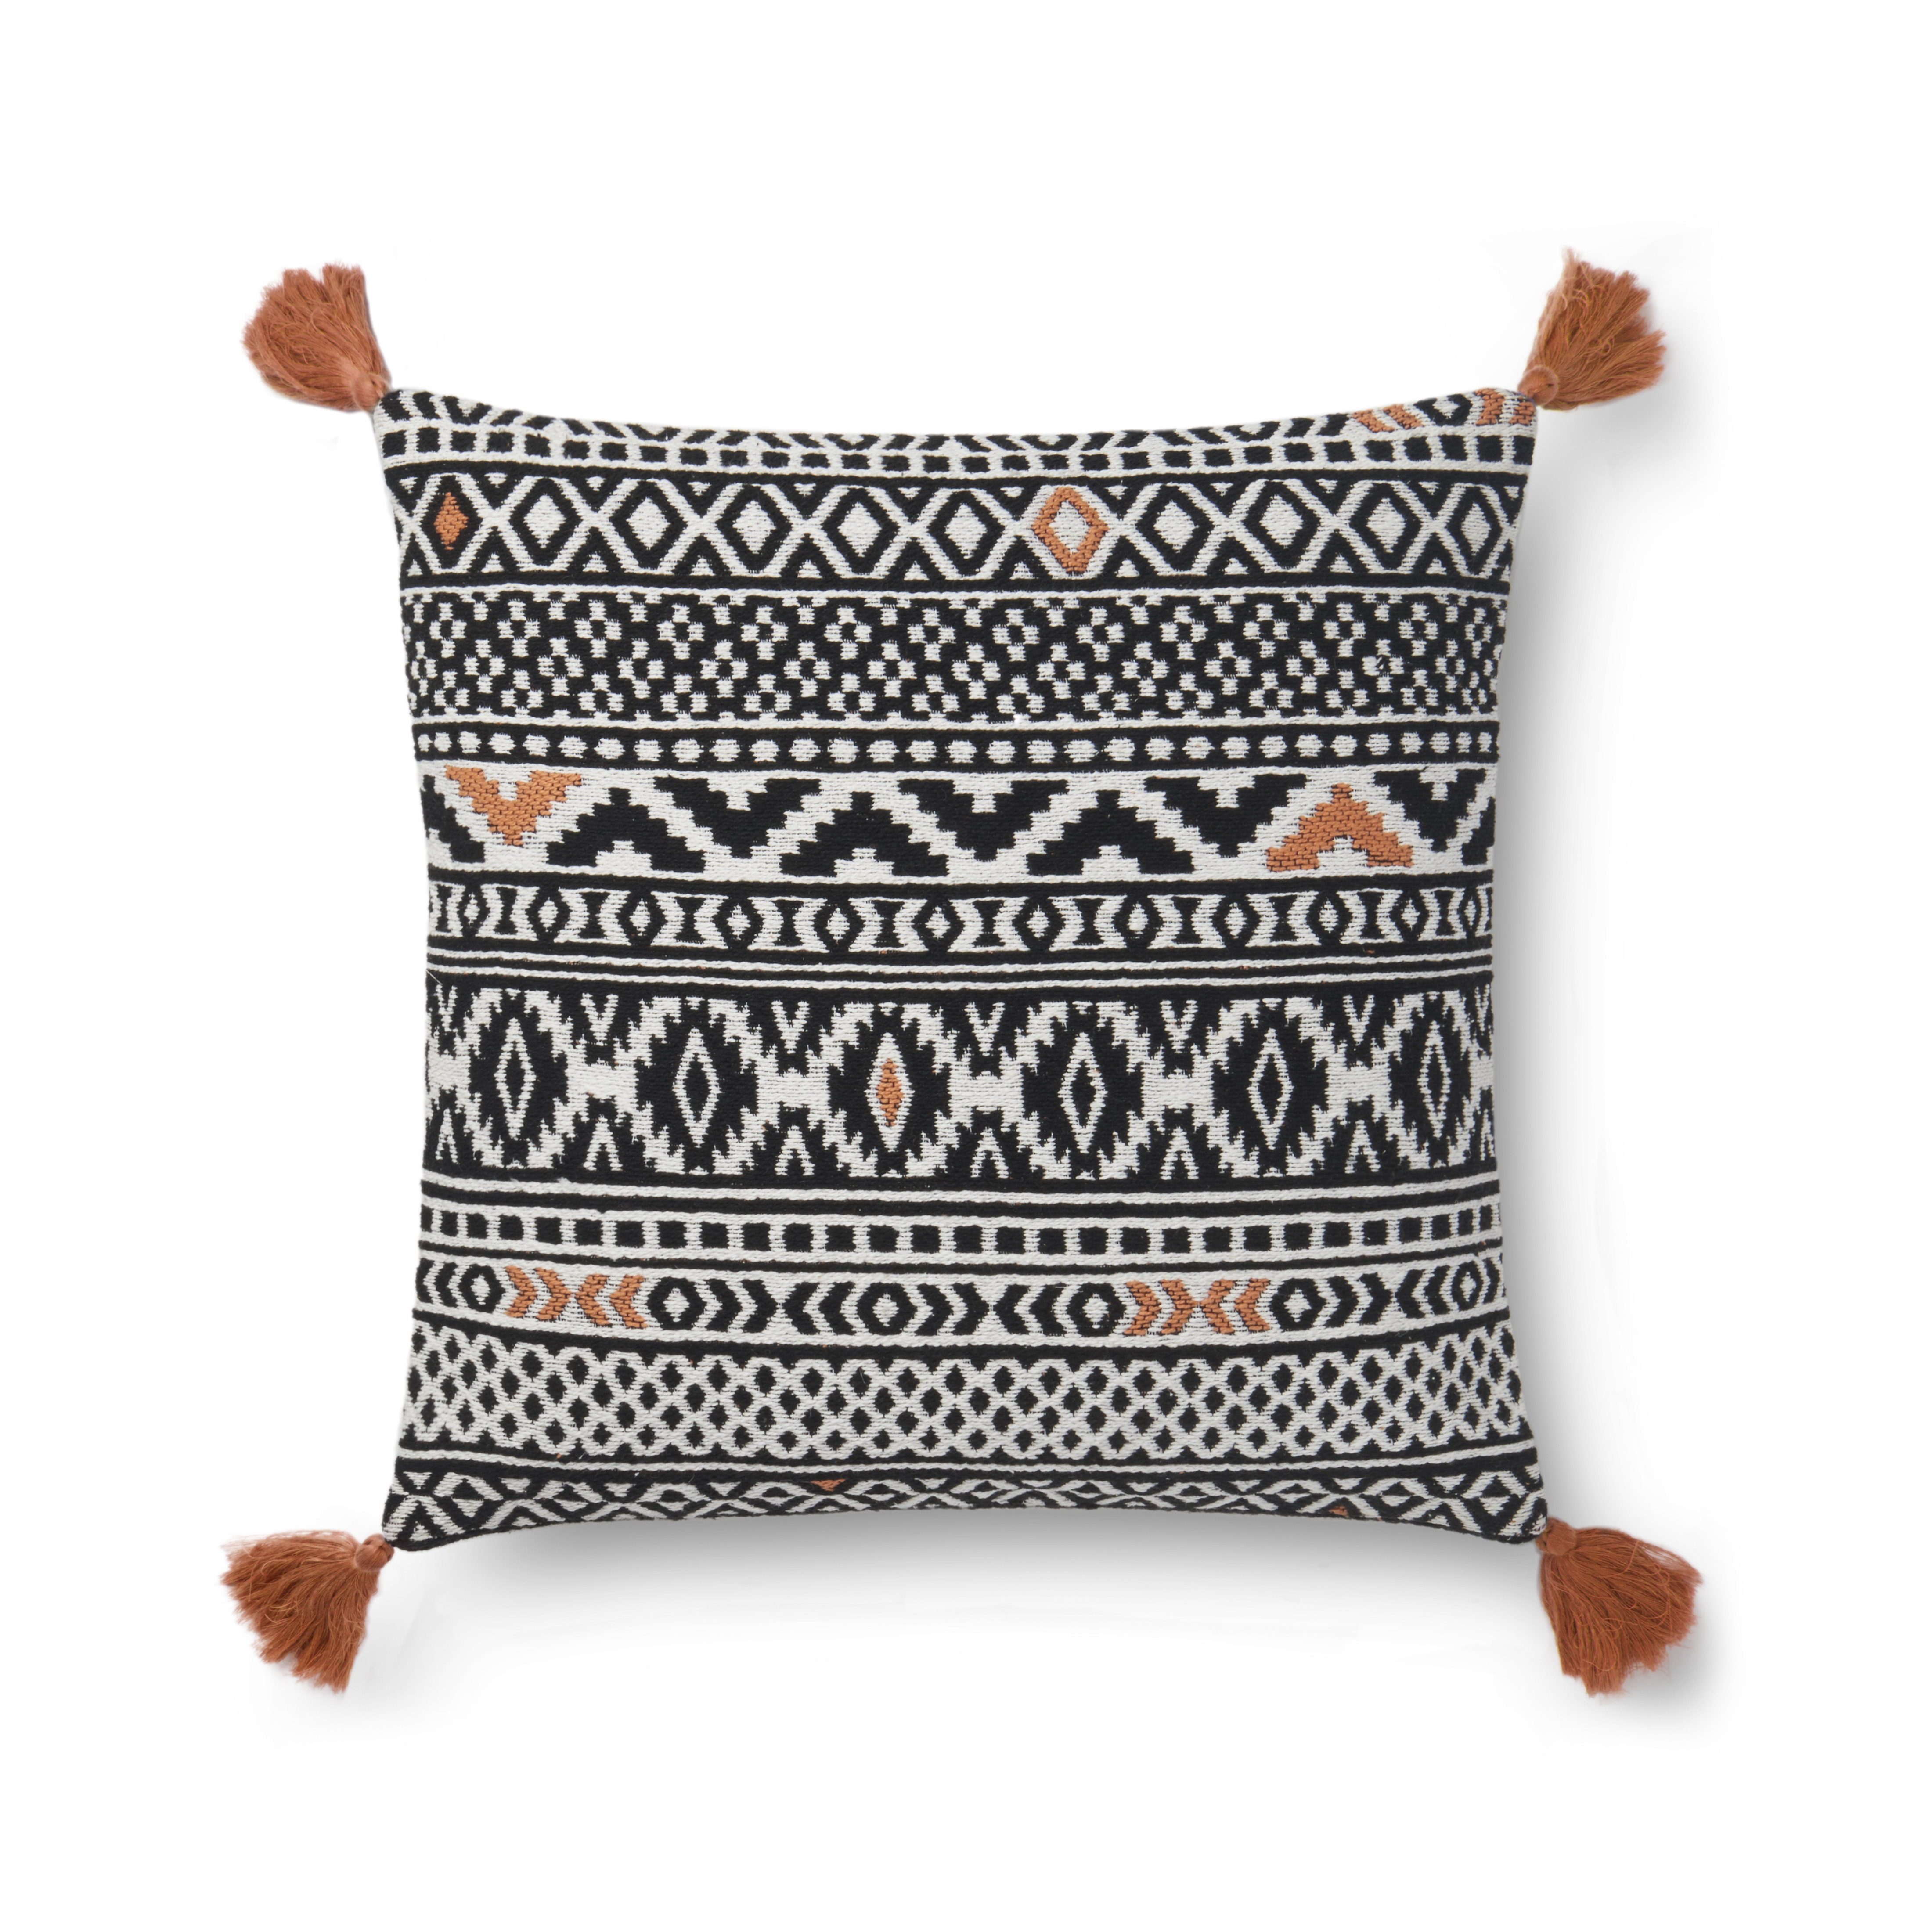 Justina Blakeney x Loloi Pillows P0637 Multi 18" x 18" Cover Only - Image 0